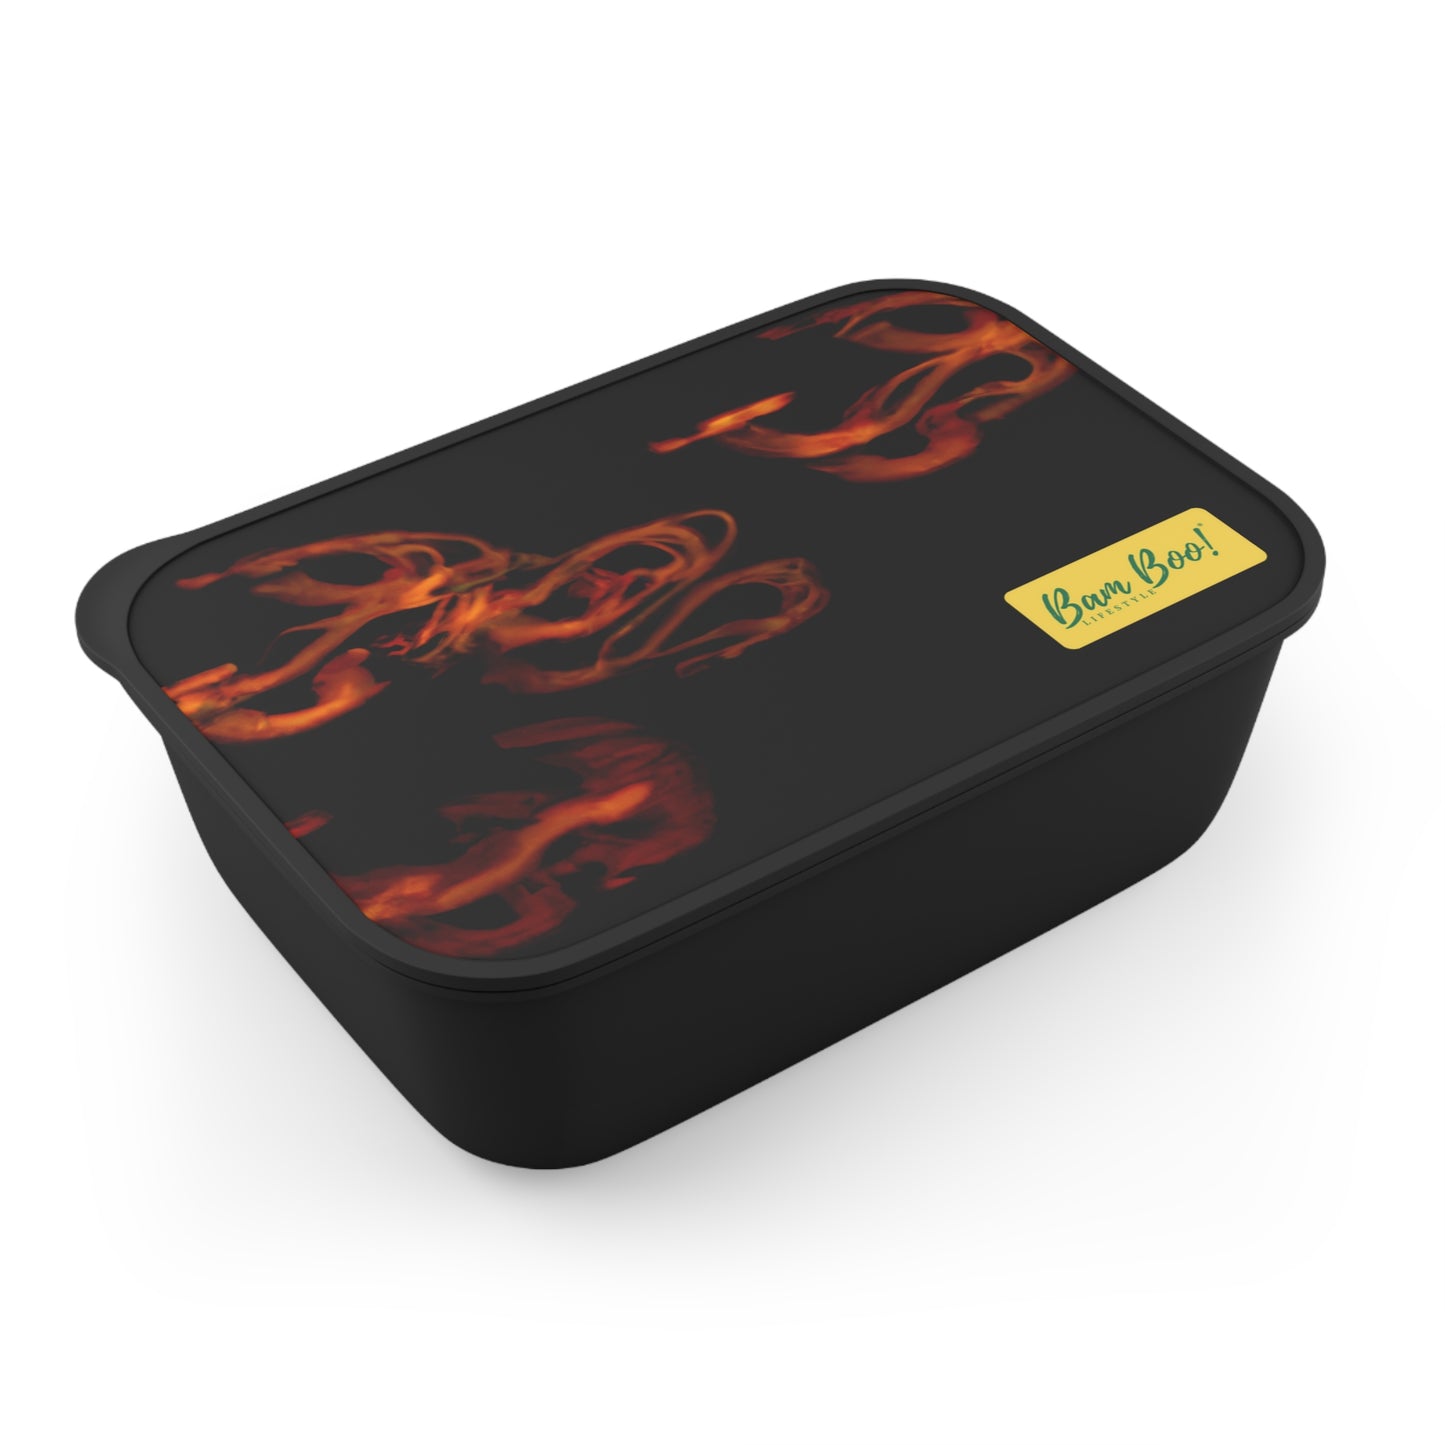 "Abstract Lightscapes" - Bam Boo! Lifestyle Eco-friendly PLA Bento Box with Band and Utensils